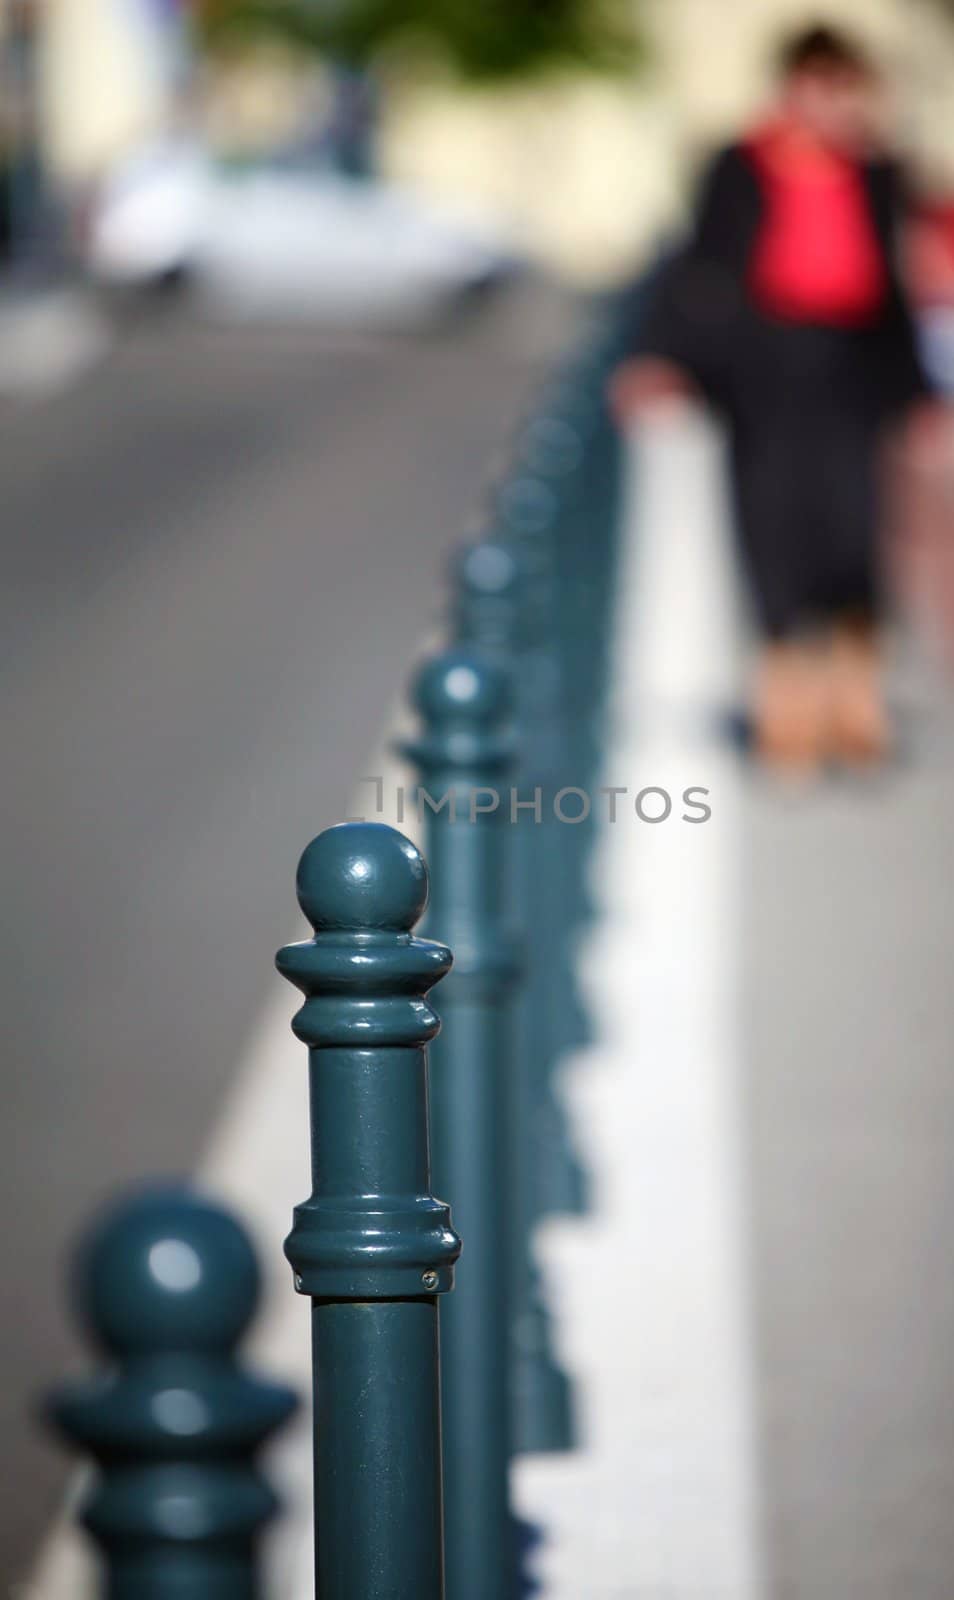 Detail of baluster on the street focused on one pillar